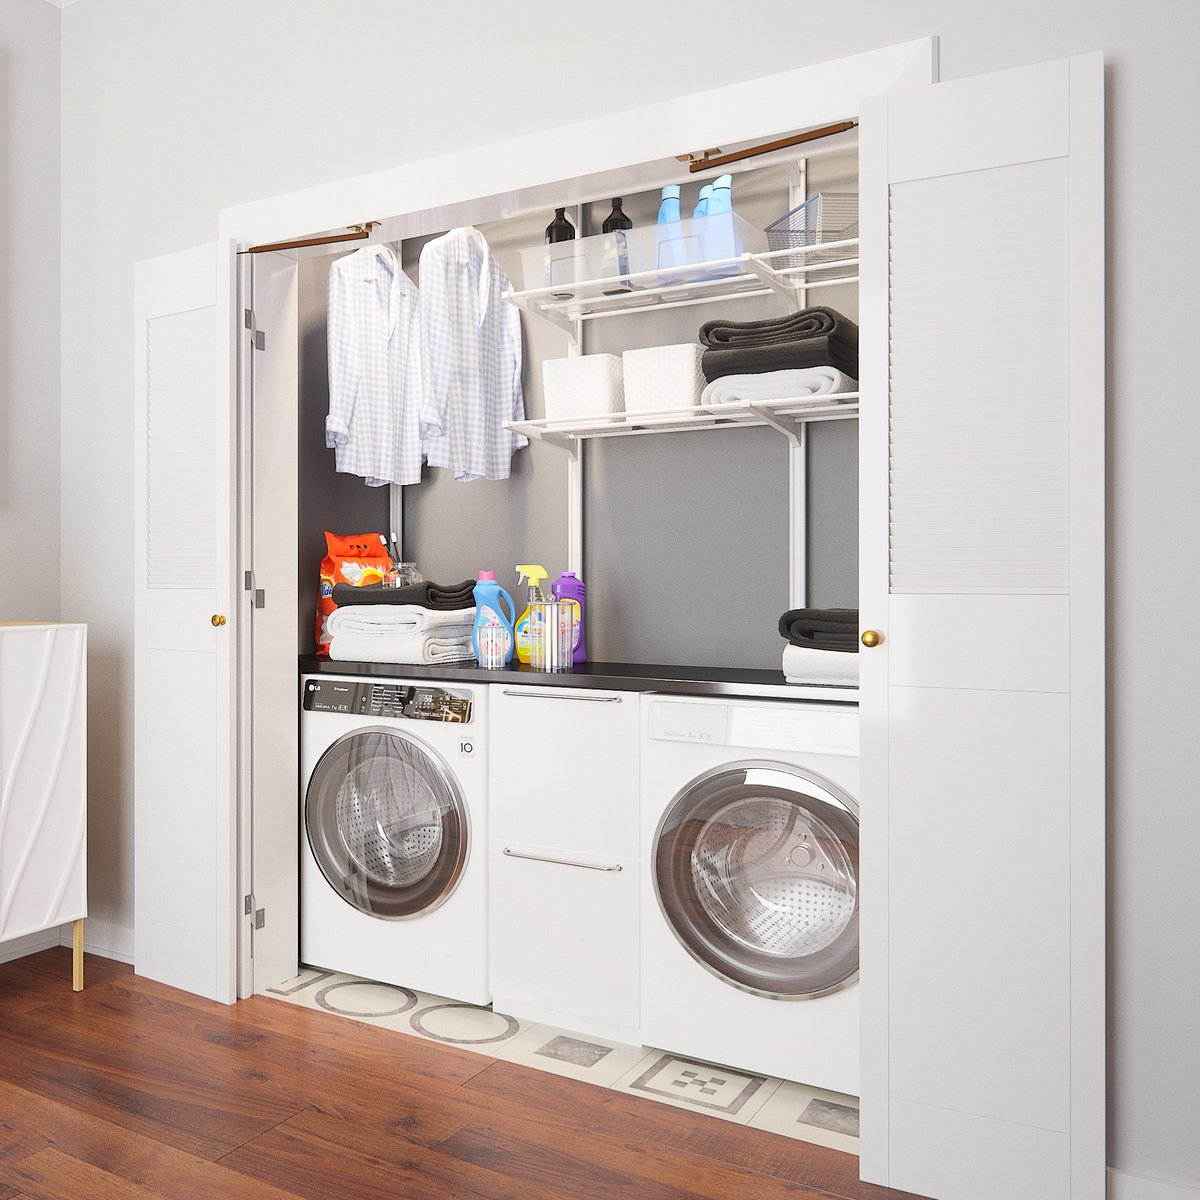 Johnson Hardware Twitterissä: "Our Full Access Bifold Door Hardware allows  you to keep the laundry out of the way until laundry day, then allow plenty  of space when it's time to get